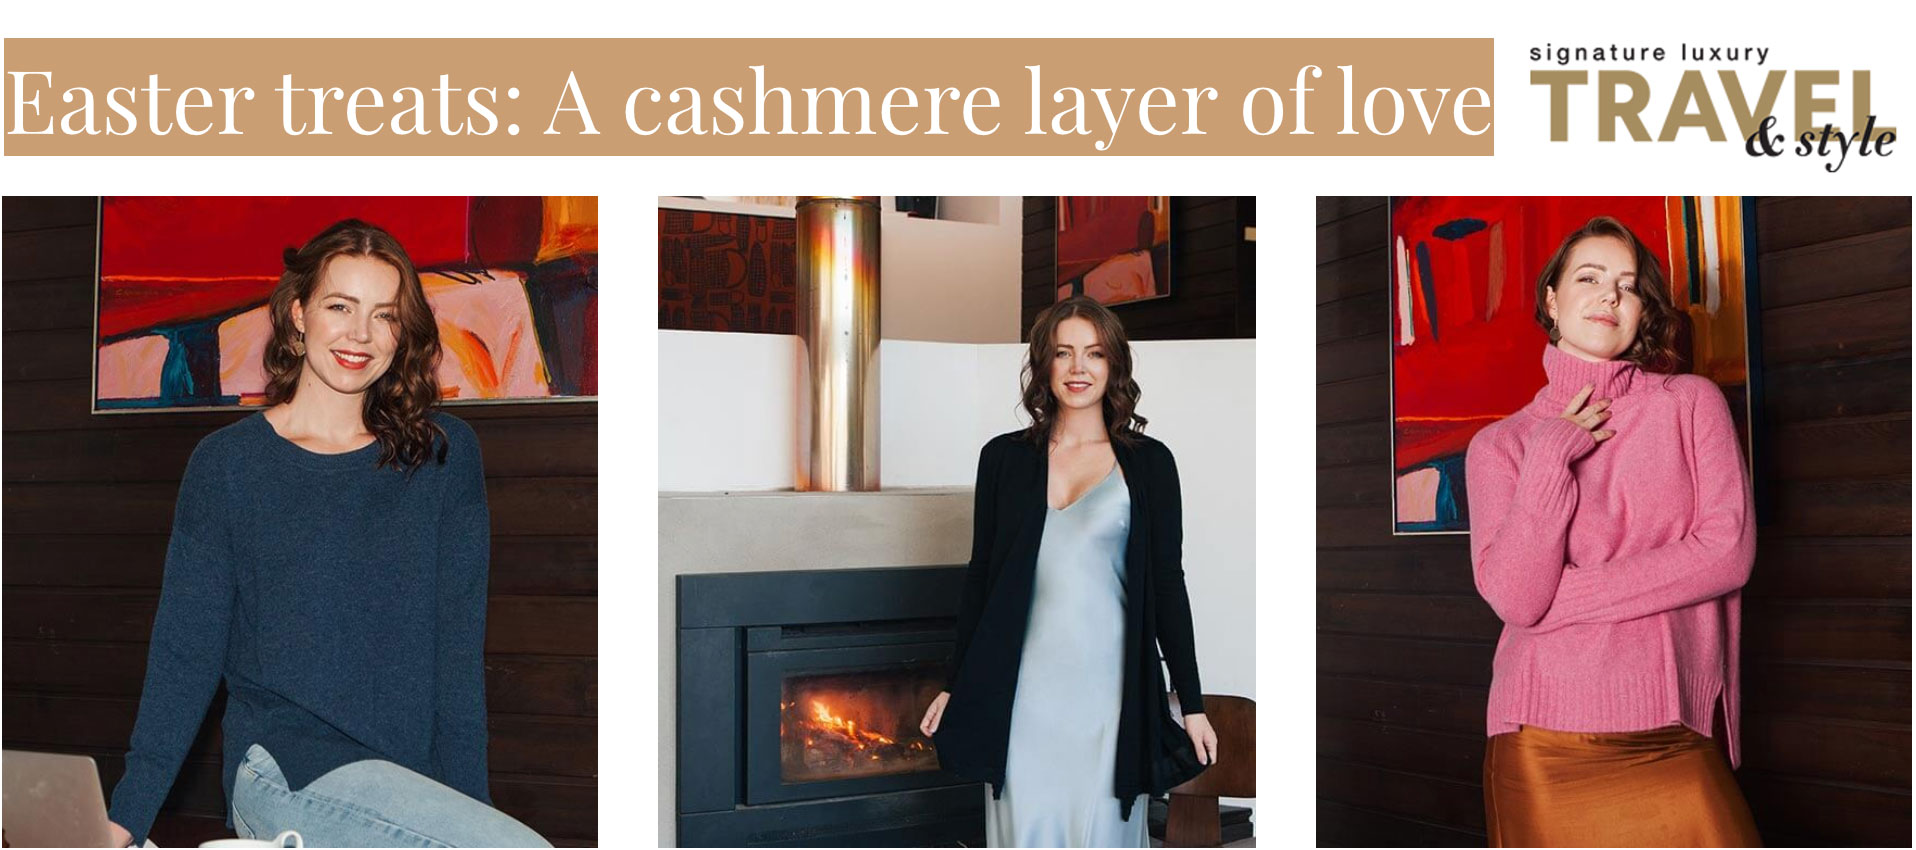 Signature Luxury Travel & Style -Easter treats: A cashmere layer of love